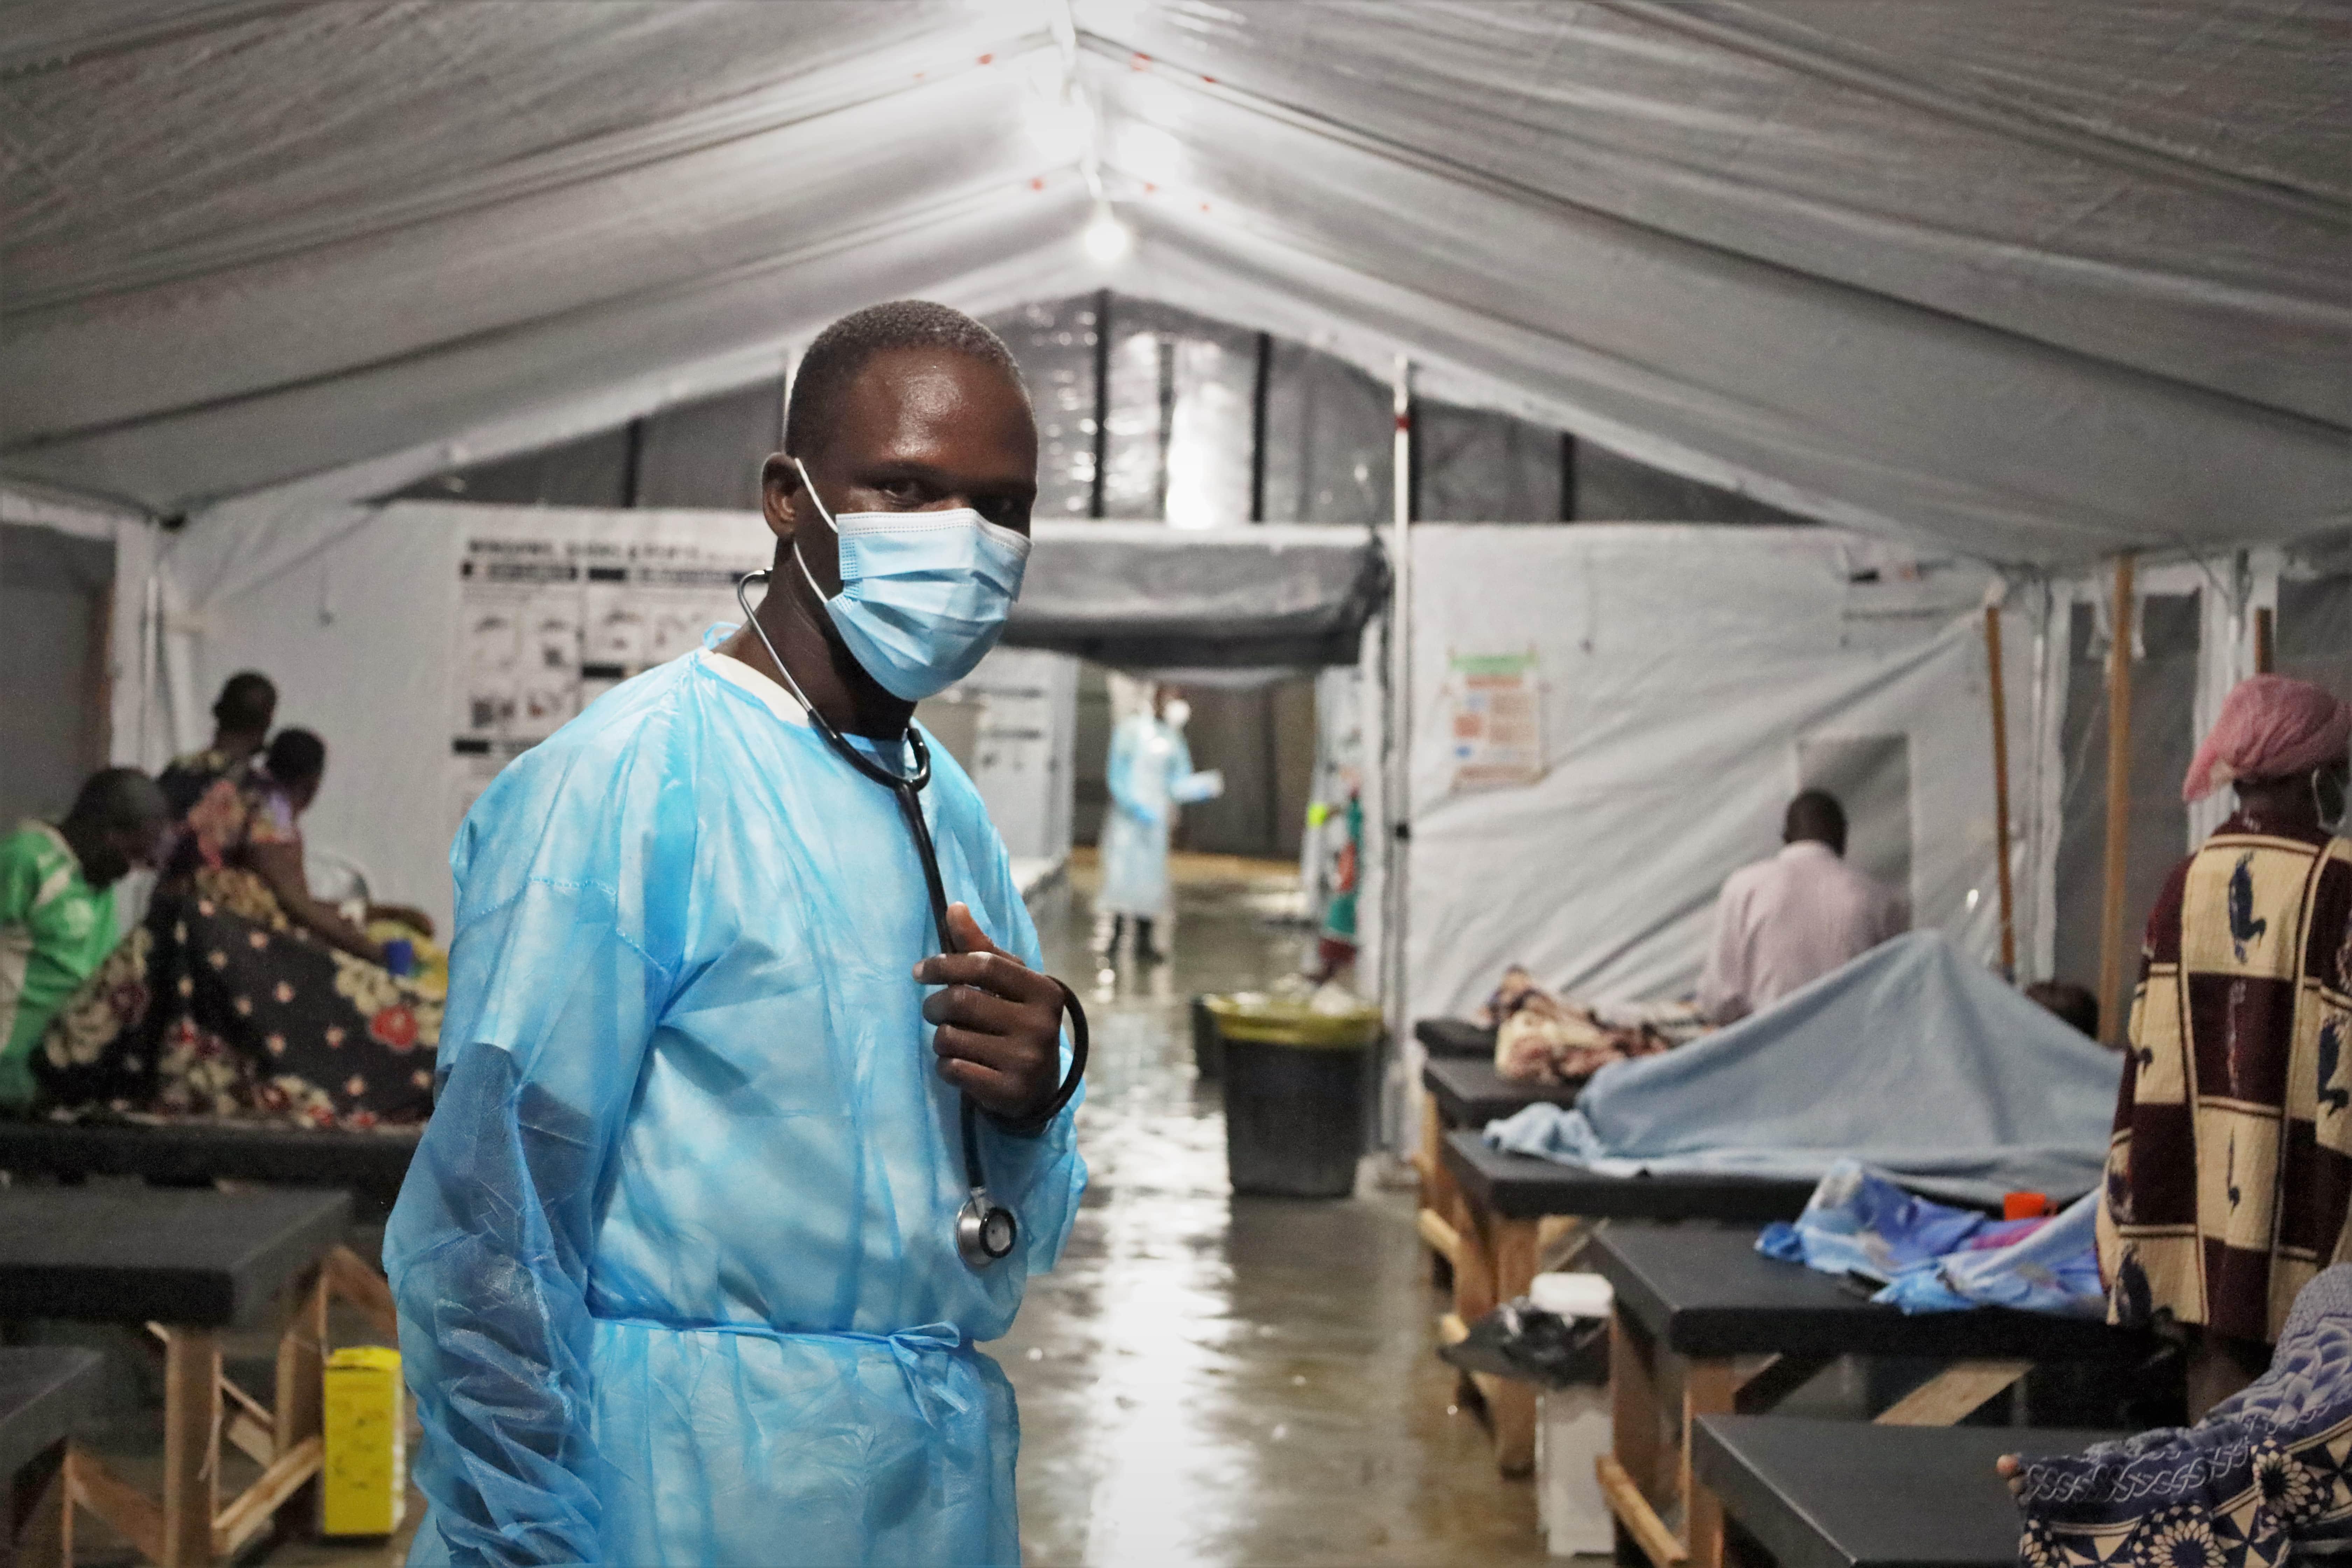 40 Years of Medical Services in Mozambique: Dr. Azize Luis Tricamo, 30 years old, a Mozambican Doctor from Zembezia province engaged in the cholera response.